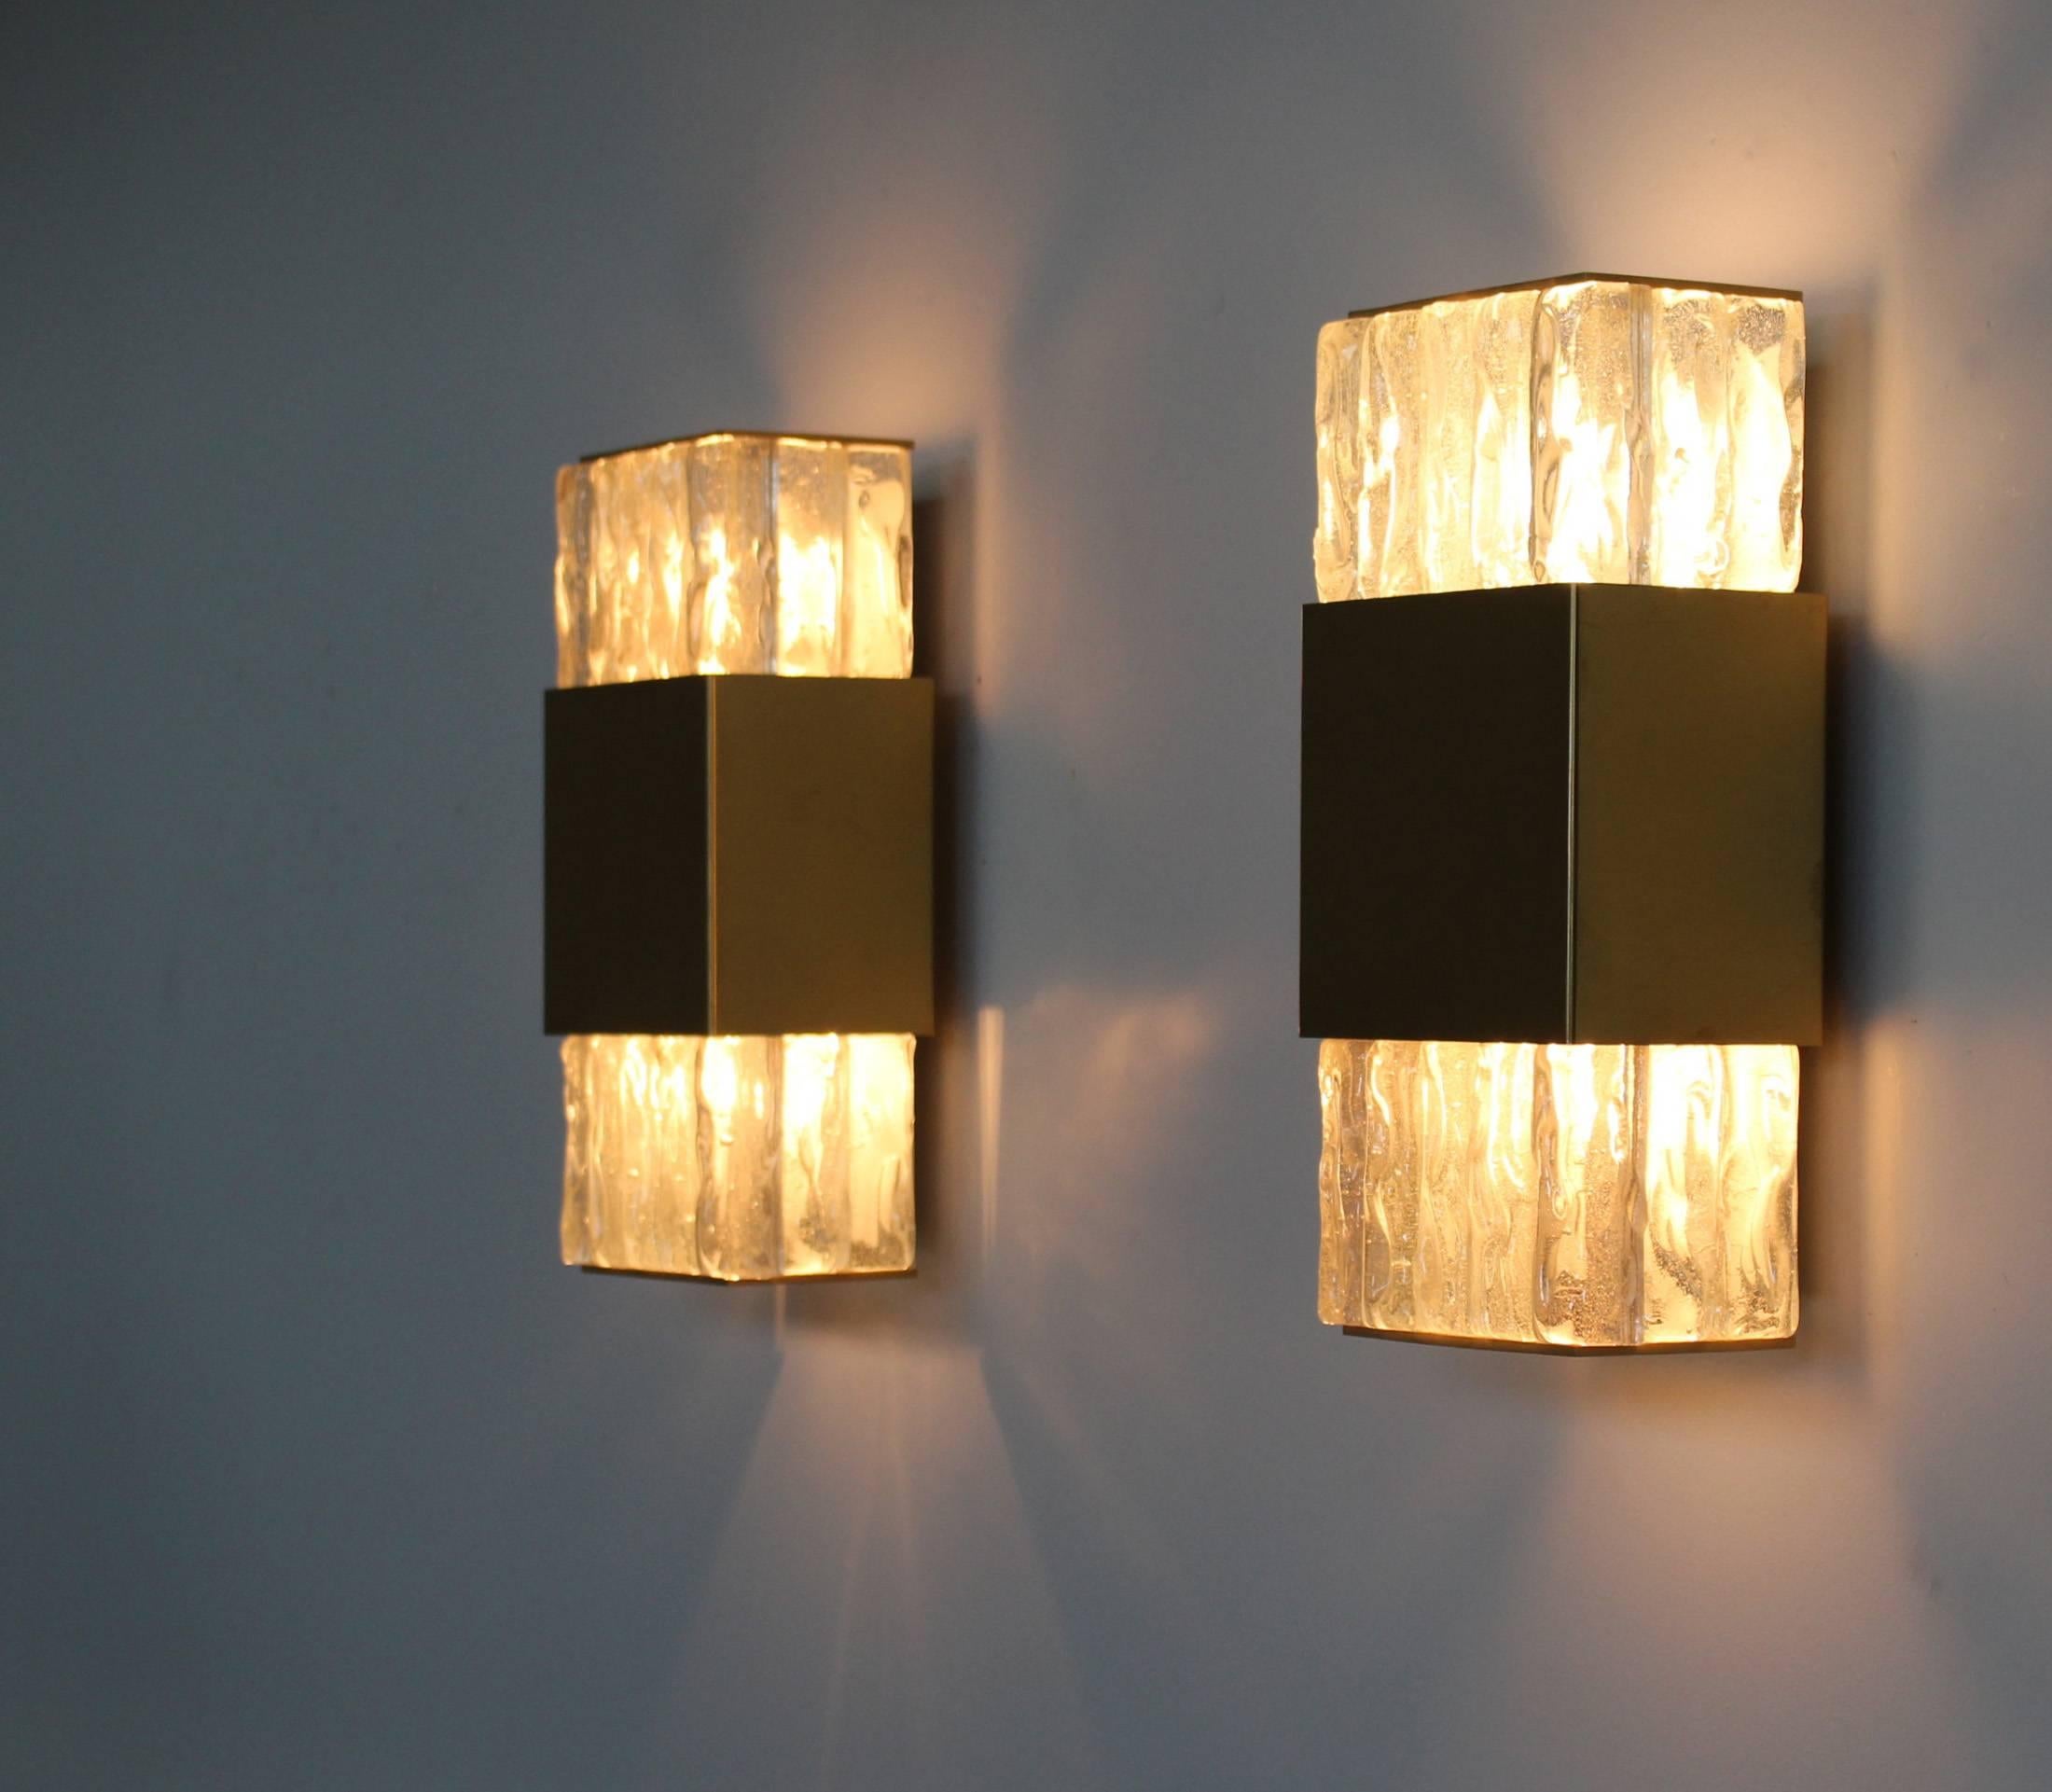 2 Fine French Art Deco Bronze and Glass Slabs Sconces by Perzel In Good Condition For Sale In Long Island City, NY